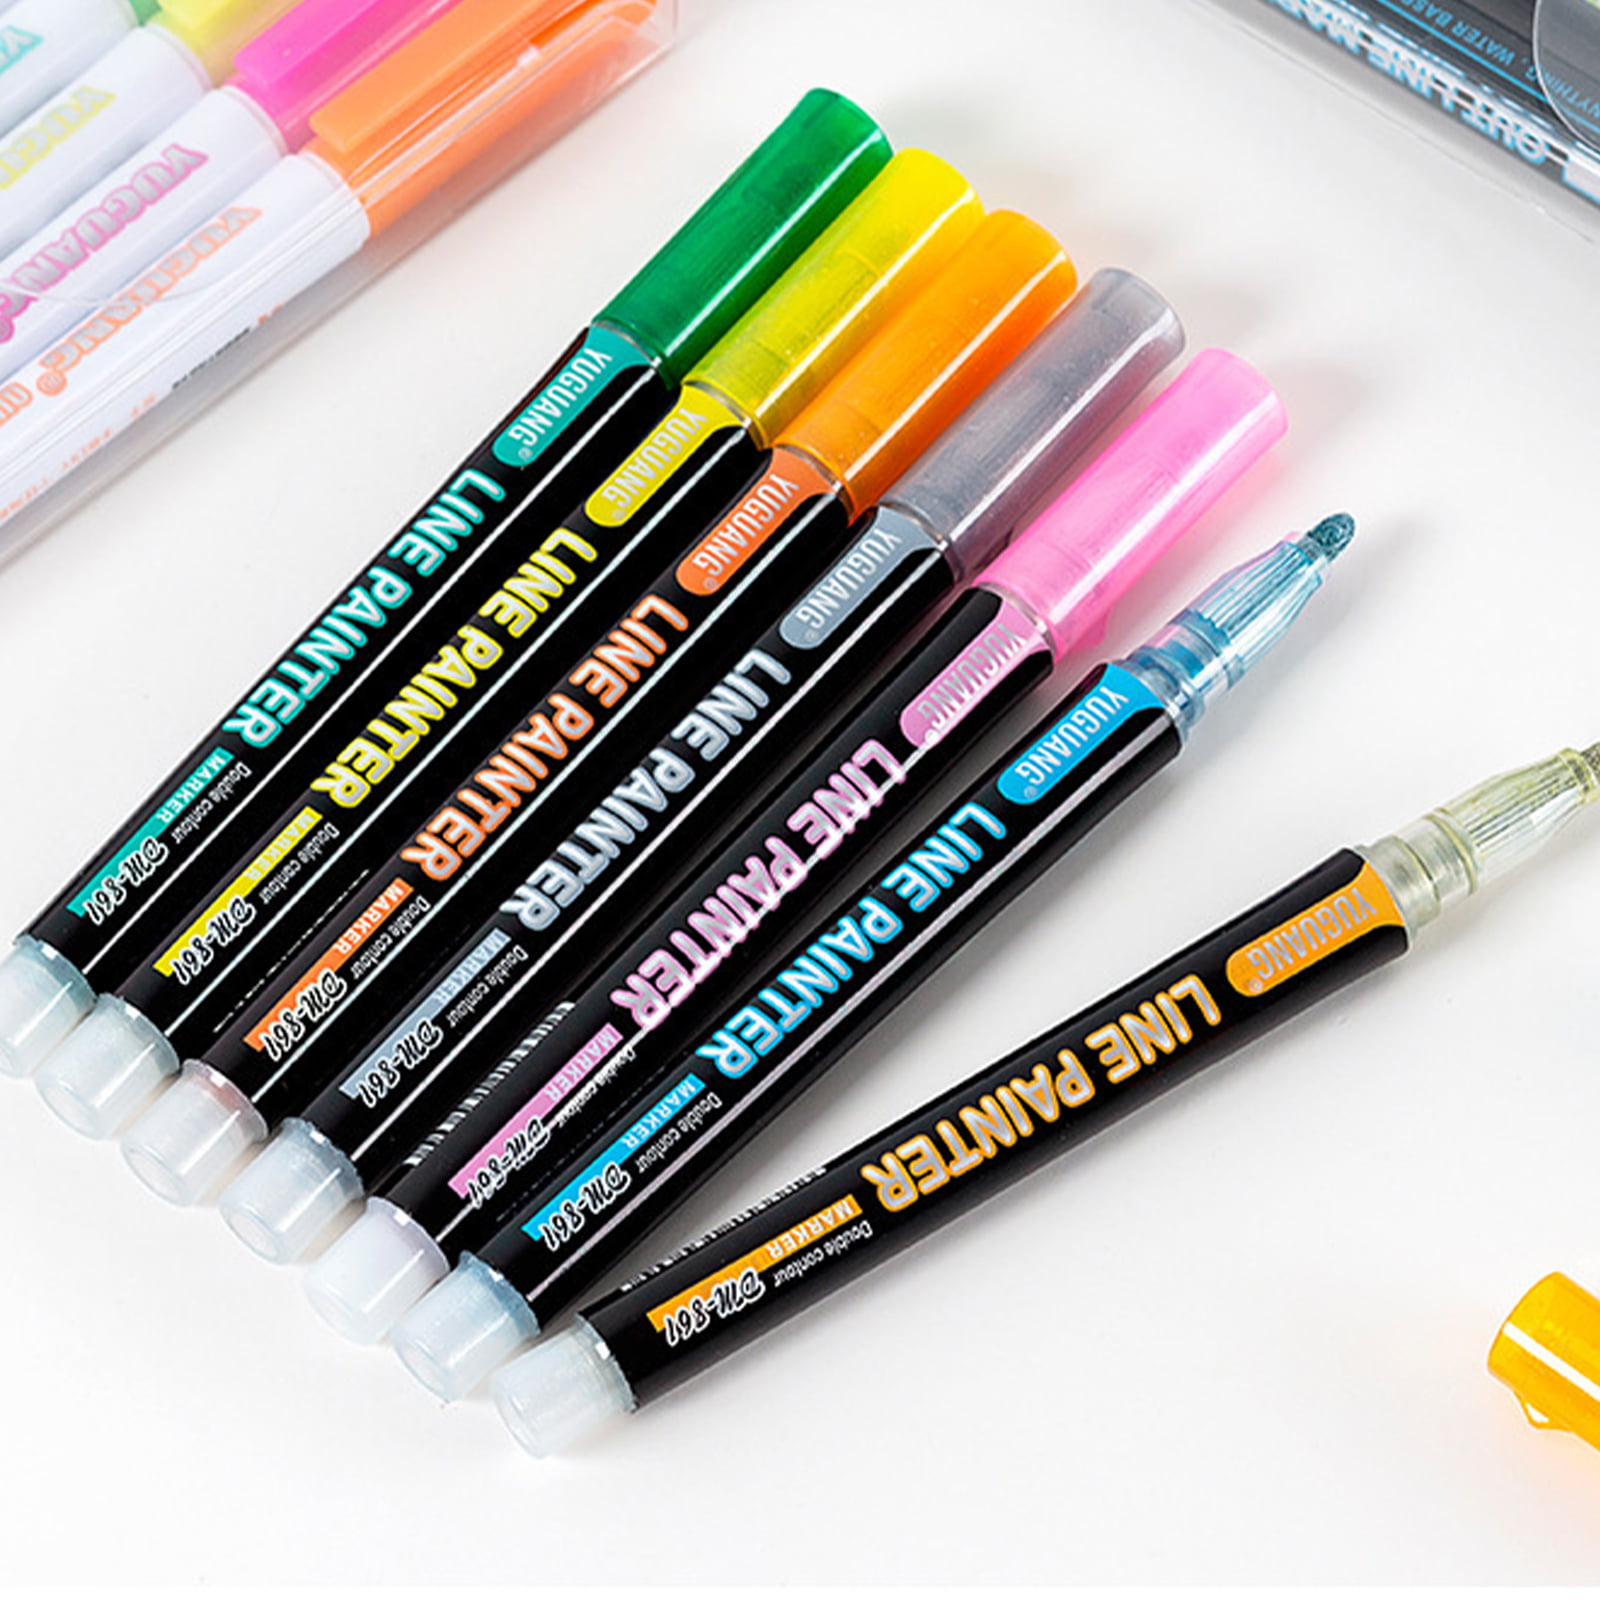 Marker Art Diaries For Paintings, Diy Cards, Metal Automatic Outline Making Markers Letters, 8/12/24 Color Outline